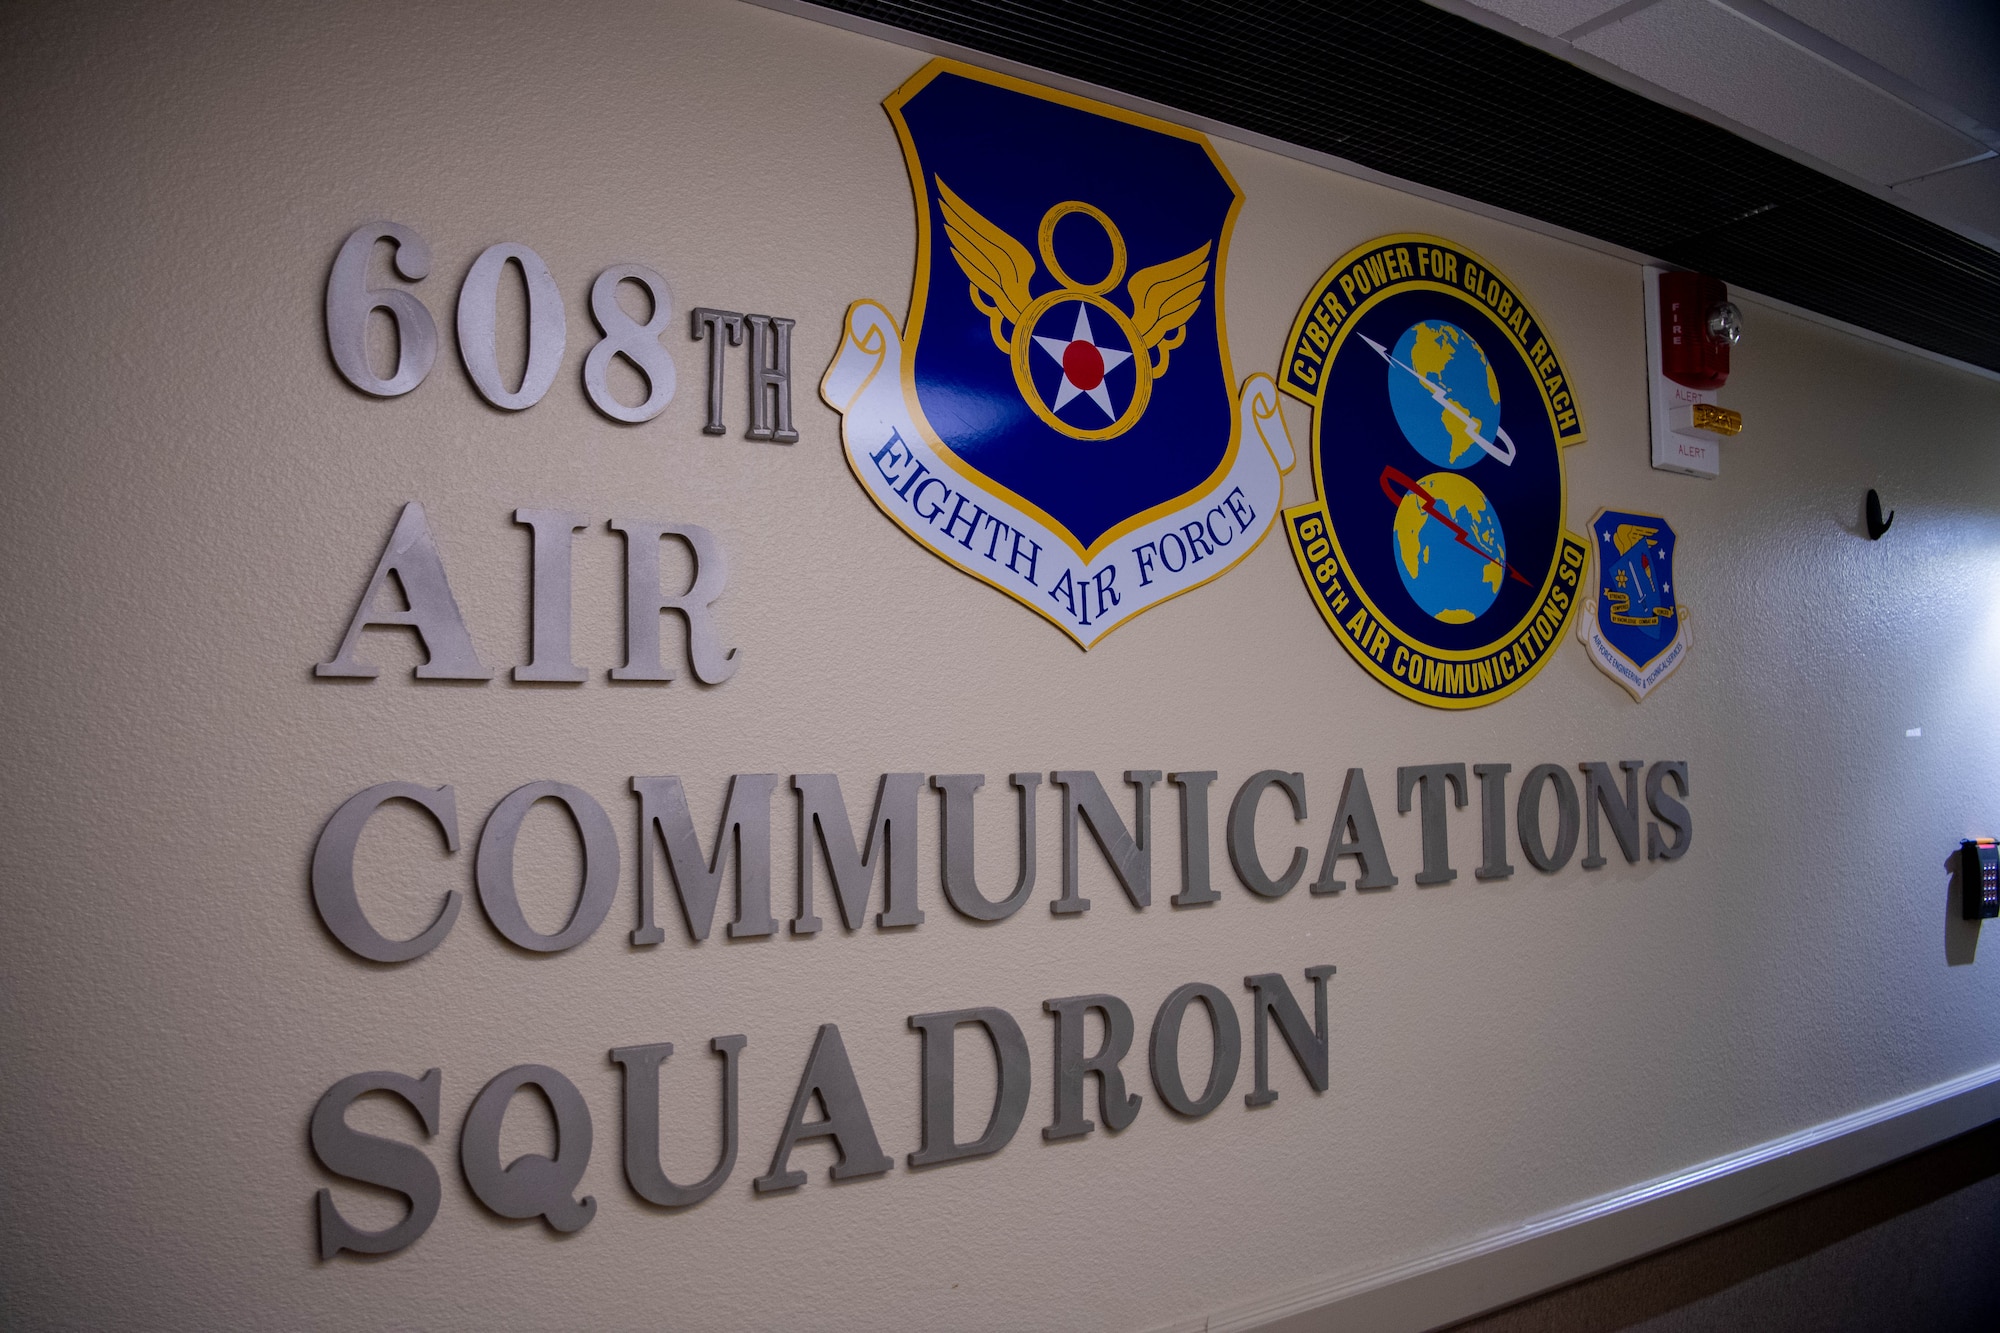 The 608th Air Communications Squadron is responsible for managing the Air Operations Center weapon system, providing rapid computer network and radio support while conducting cyber maintenance and defense operations. (U.S. Air Force photo by Staff Sgt. Bria Hughes)